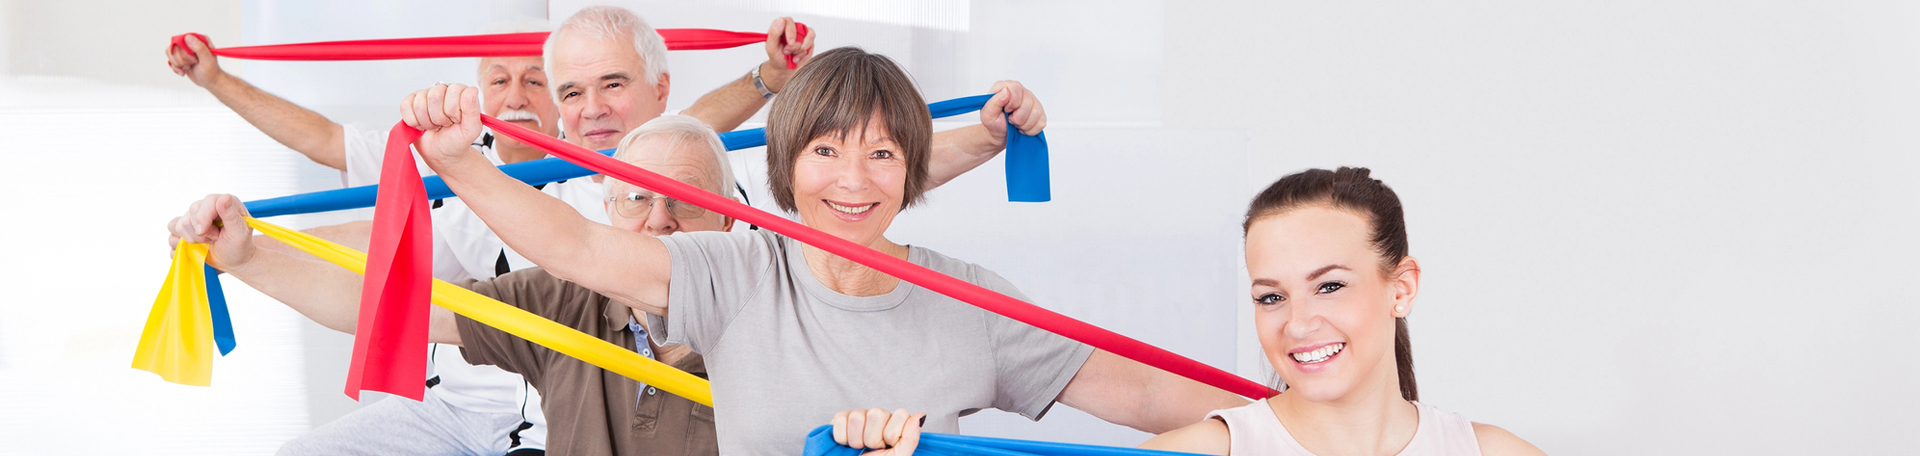 Nashua chiropractic care and exercise of all sorts help reduce chronic pain and distress